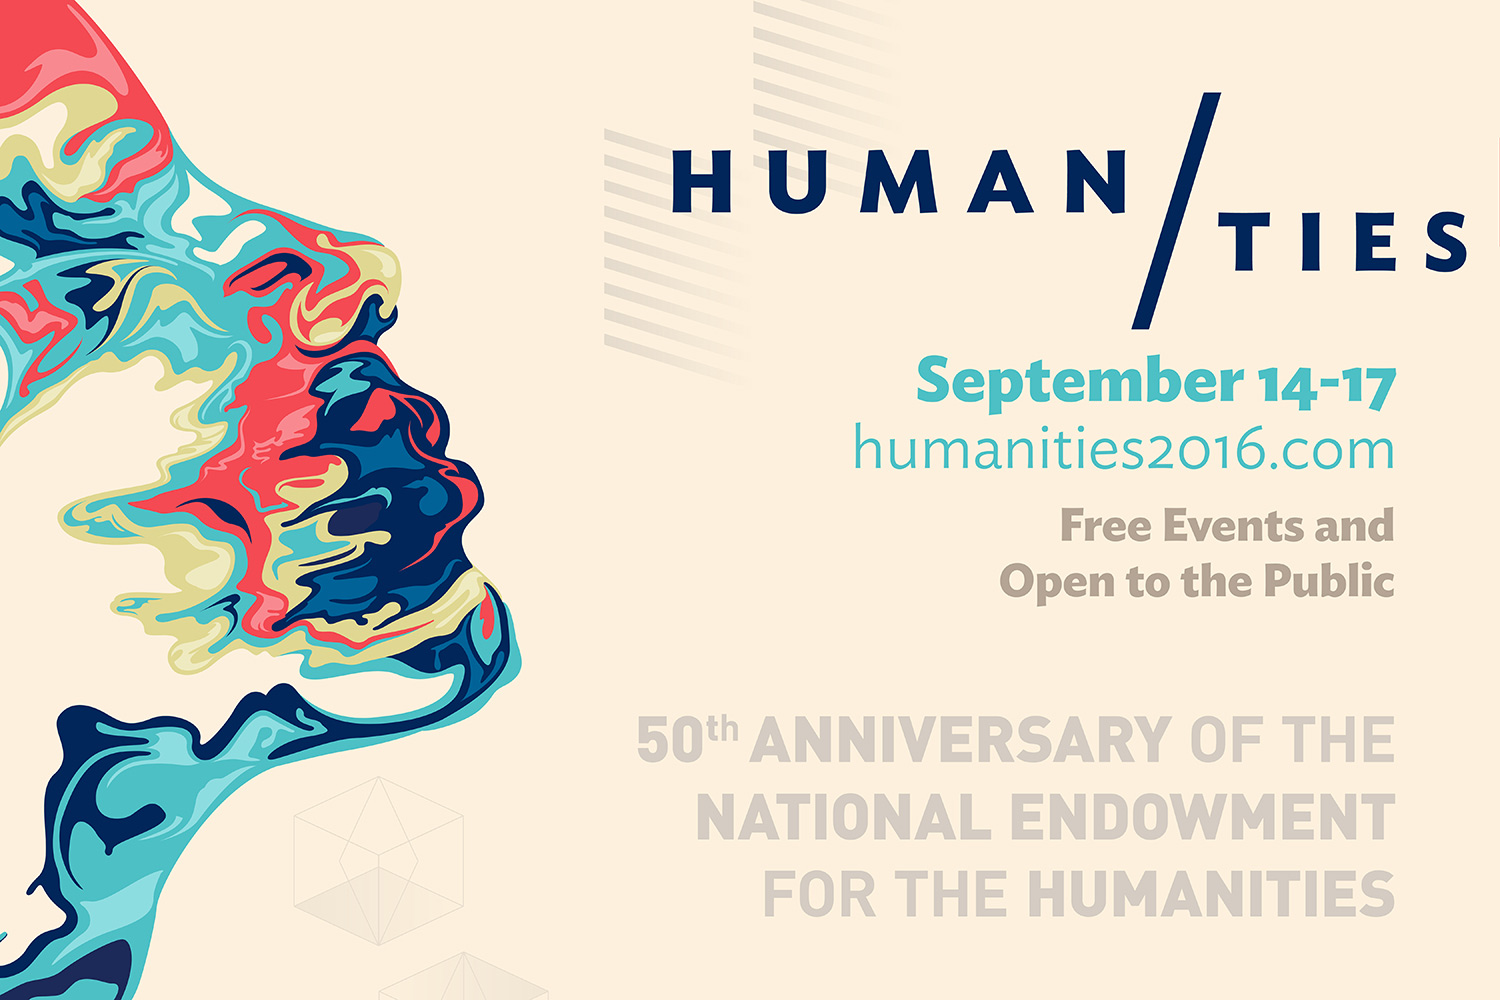 Event poster reads: Human Ties September 14-17 humanities2016.com Free events and open to the public 50th anniversary of the national endowment for the Humanities